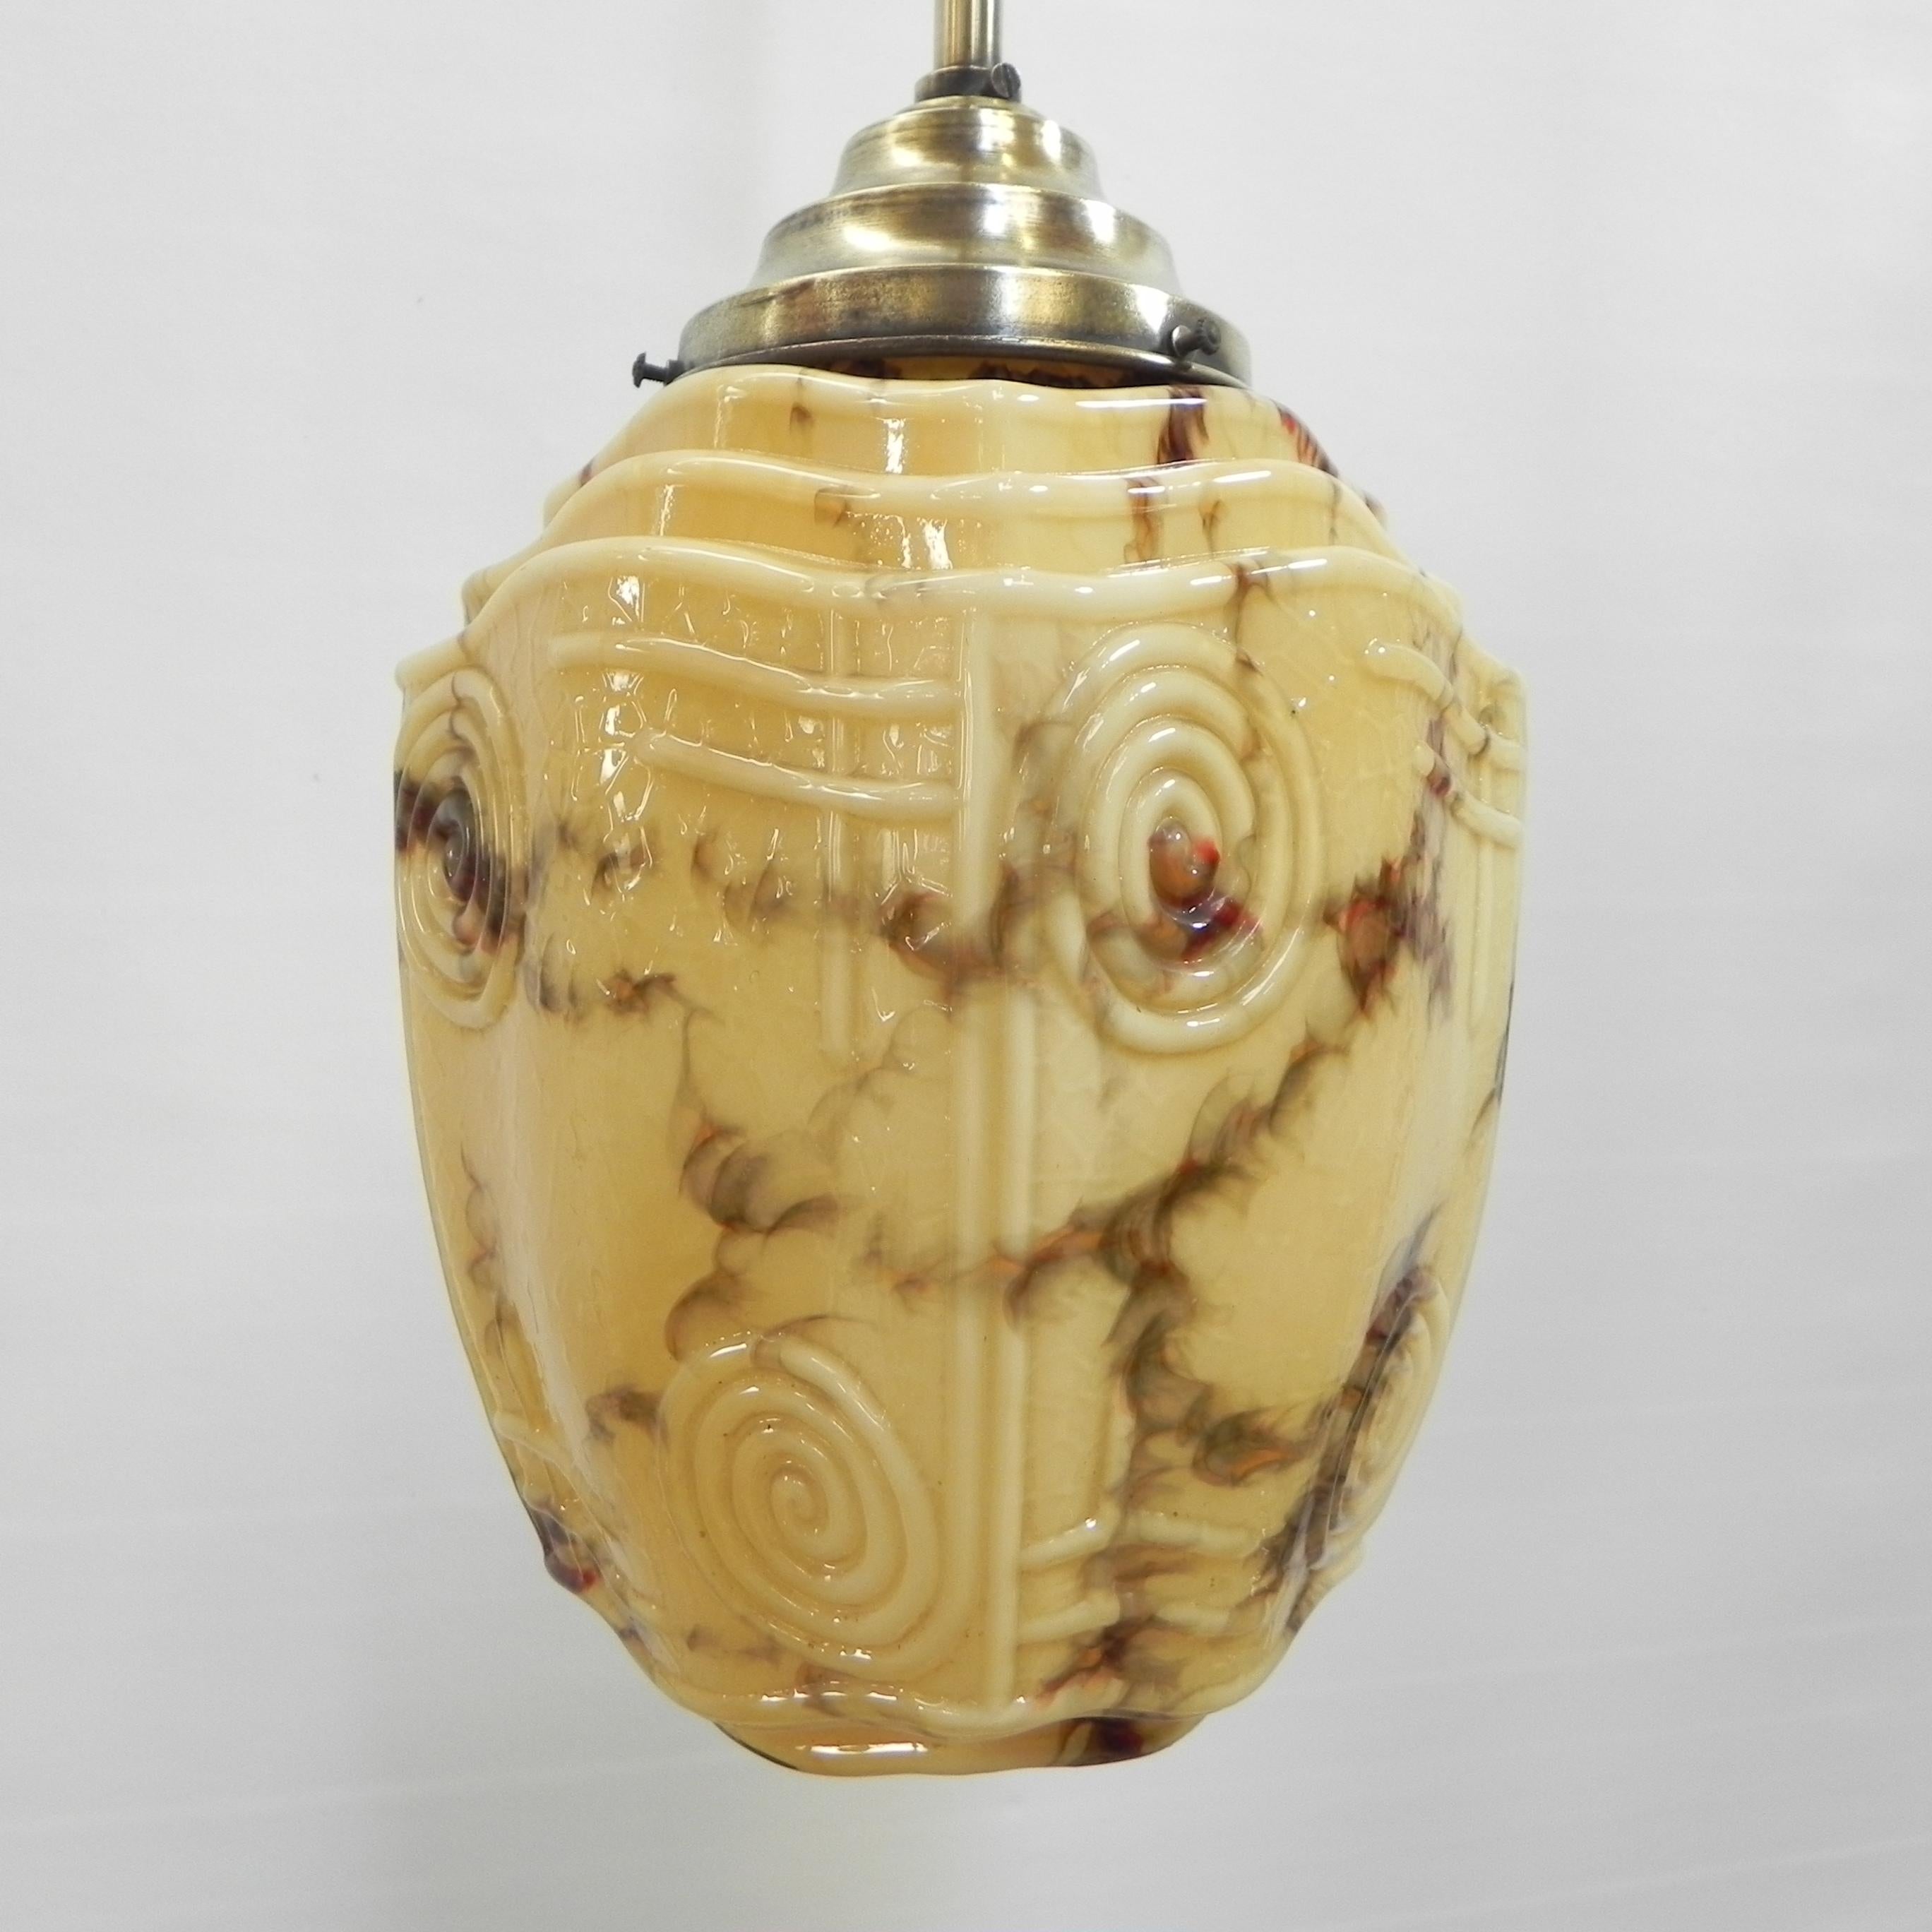 Brass Art Deco hanging lamp with marbled glass shade For Sale